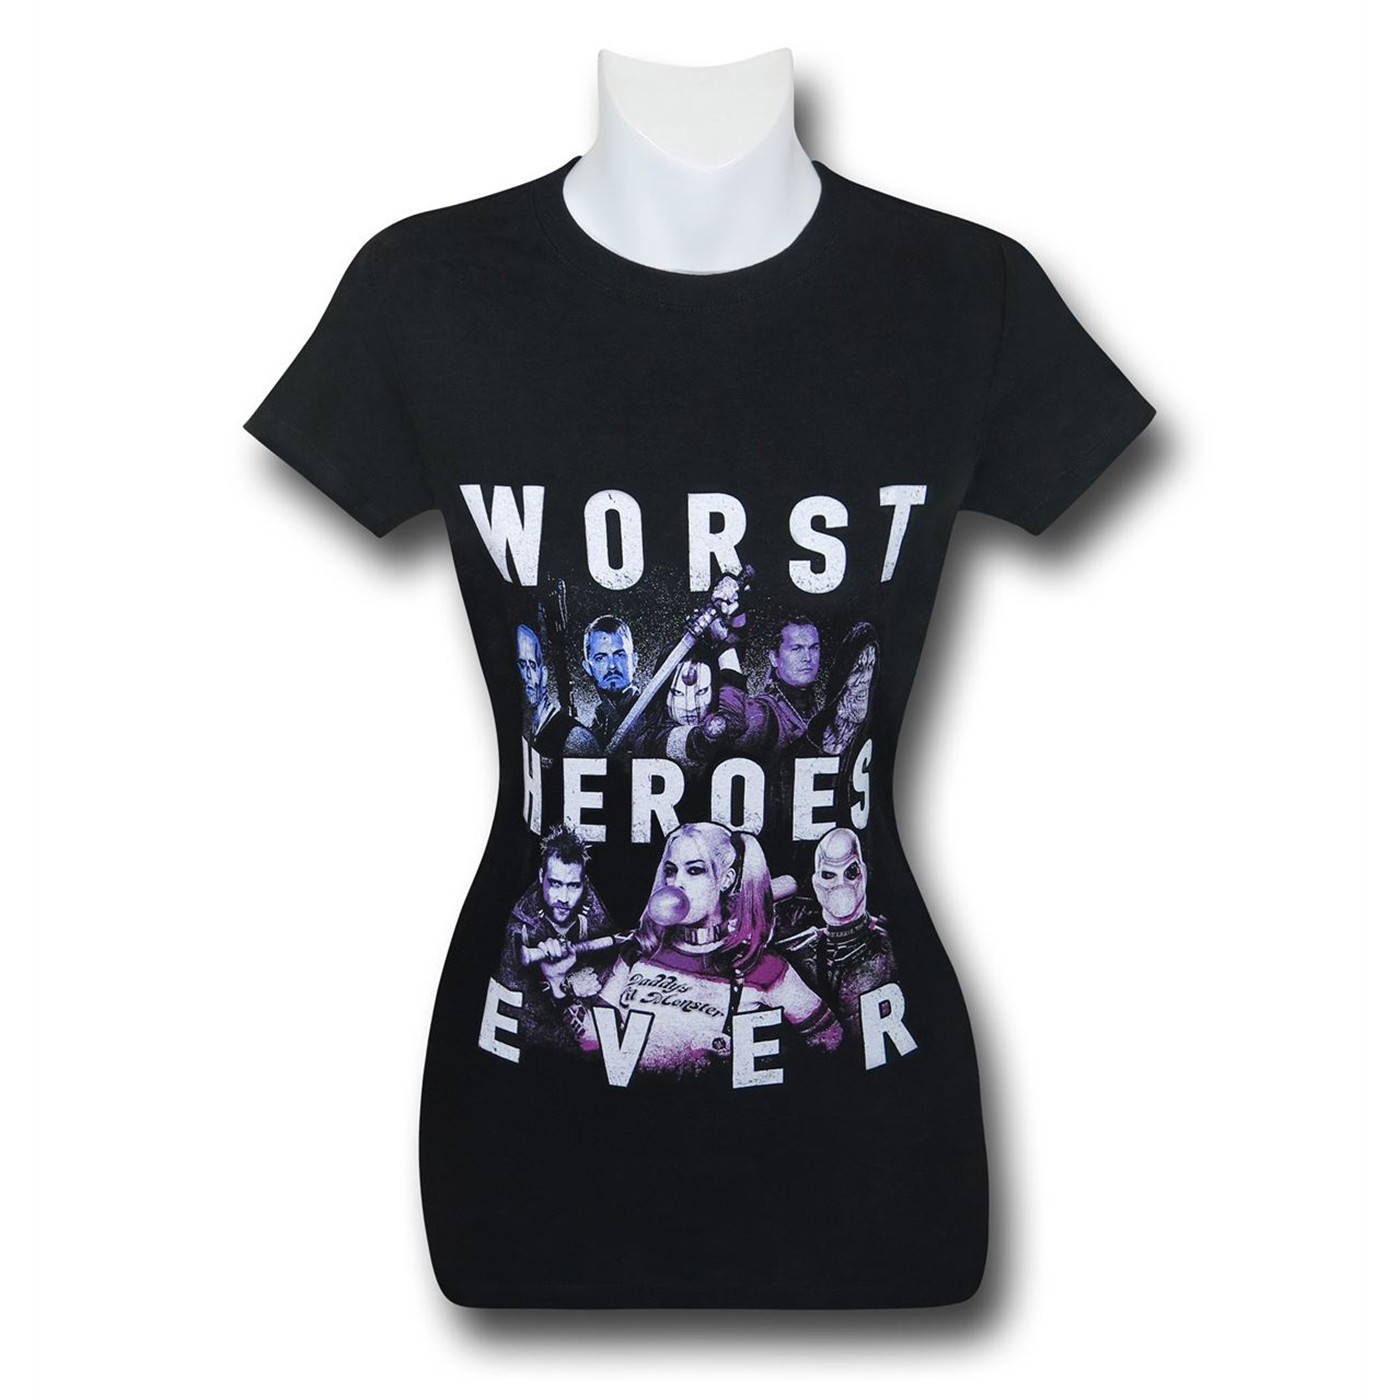 Suicide Squad Worst Heroes Women's T-Shirt